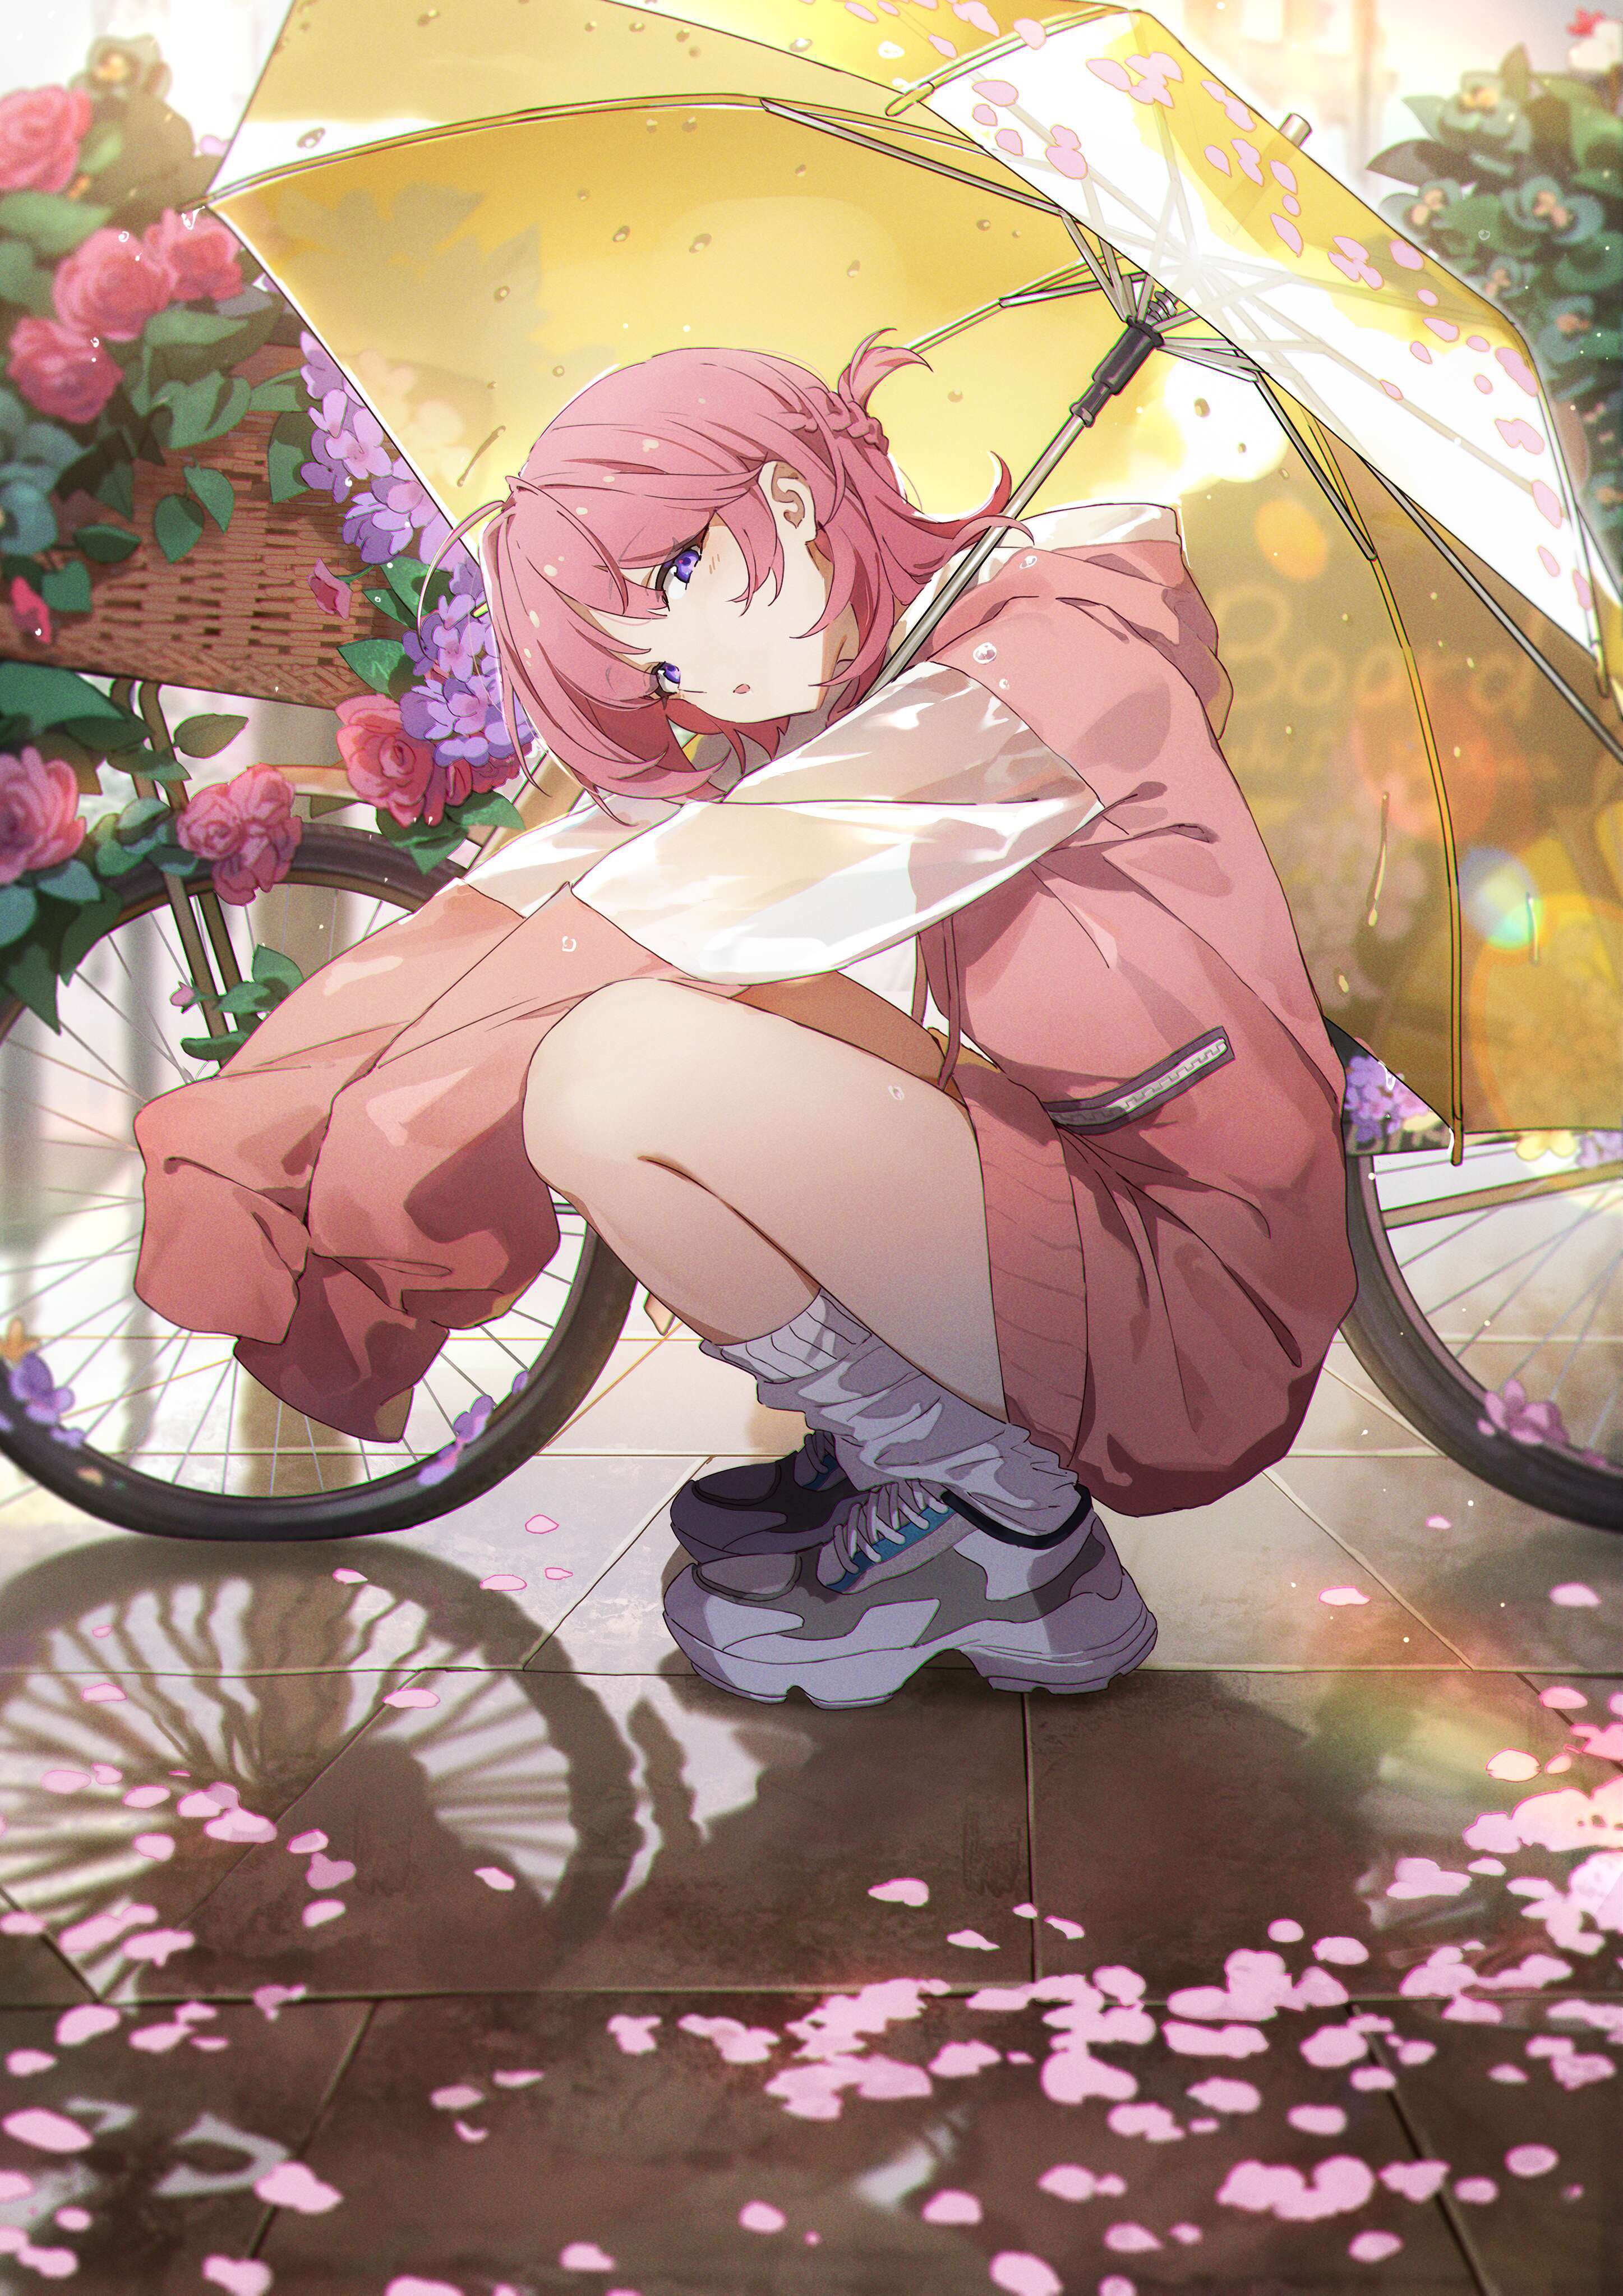 Anime Anime Girls Pixiv Original Characters Rain Shoes Petals Rainbows Looking At Viewer Flowers Bic 2894x4093